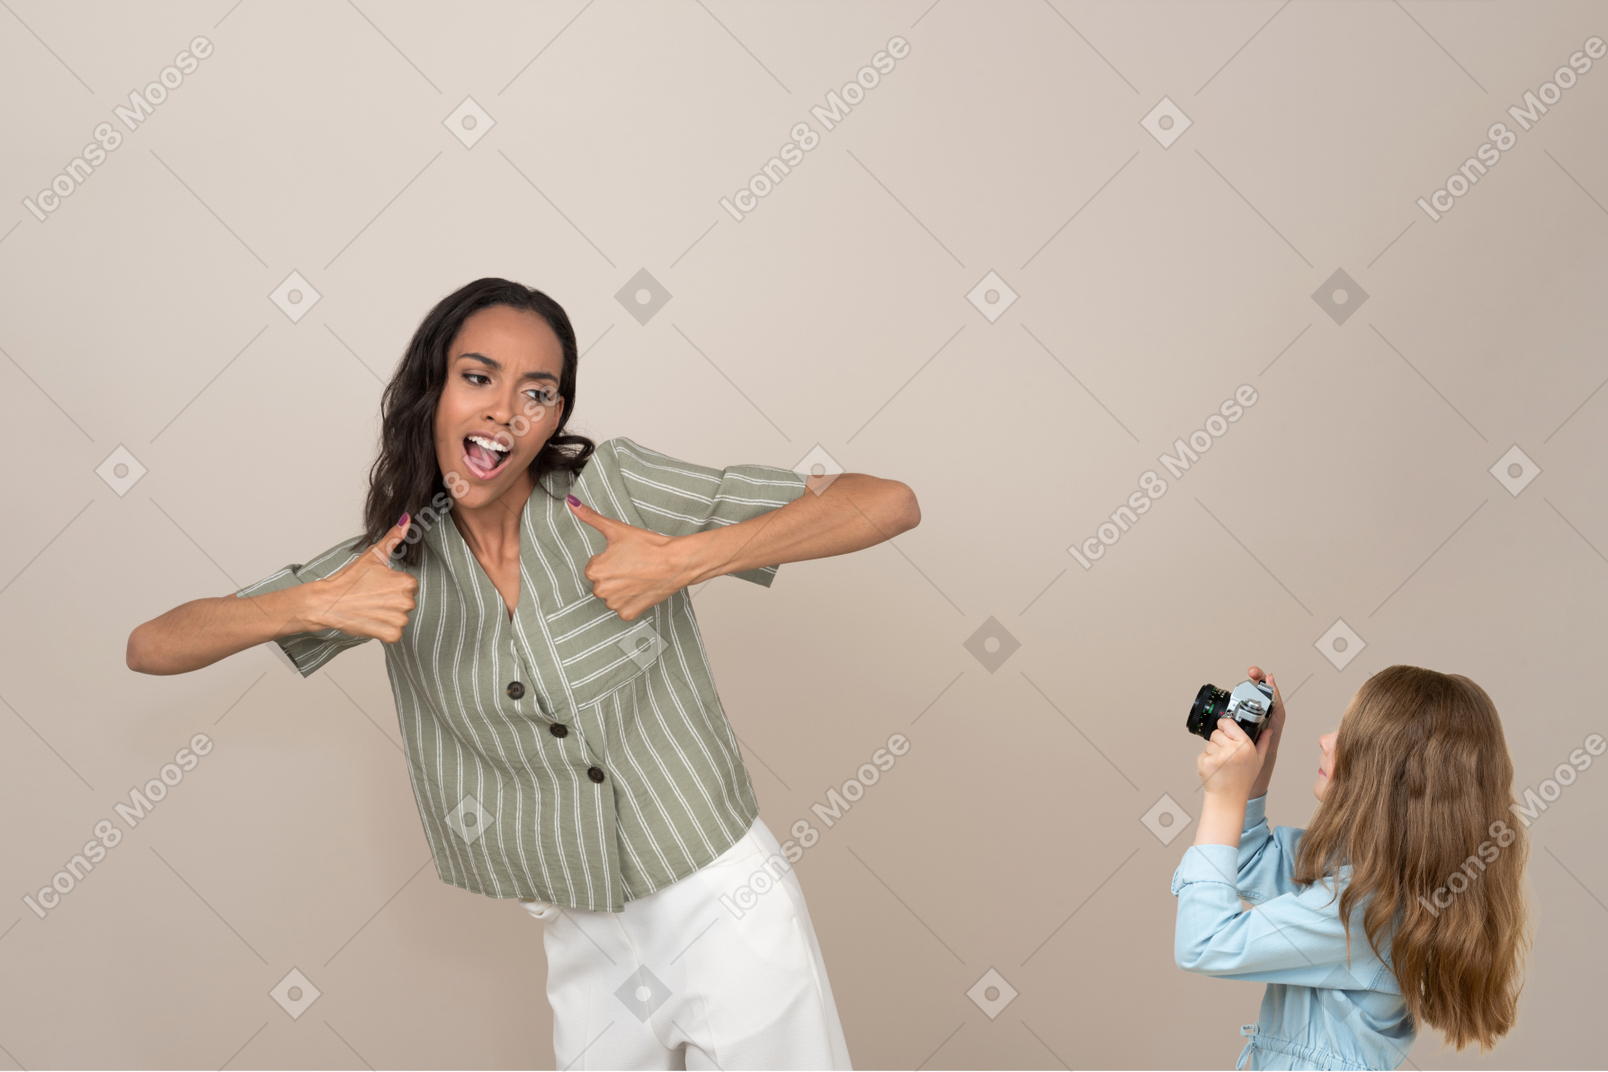 Little girl taking a picture of a young woman